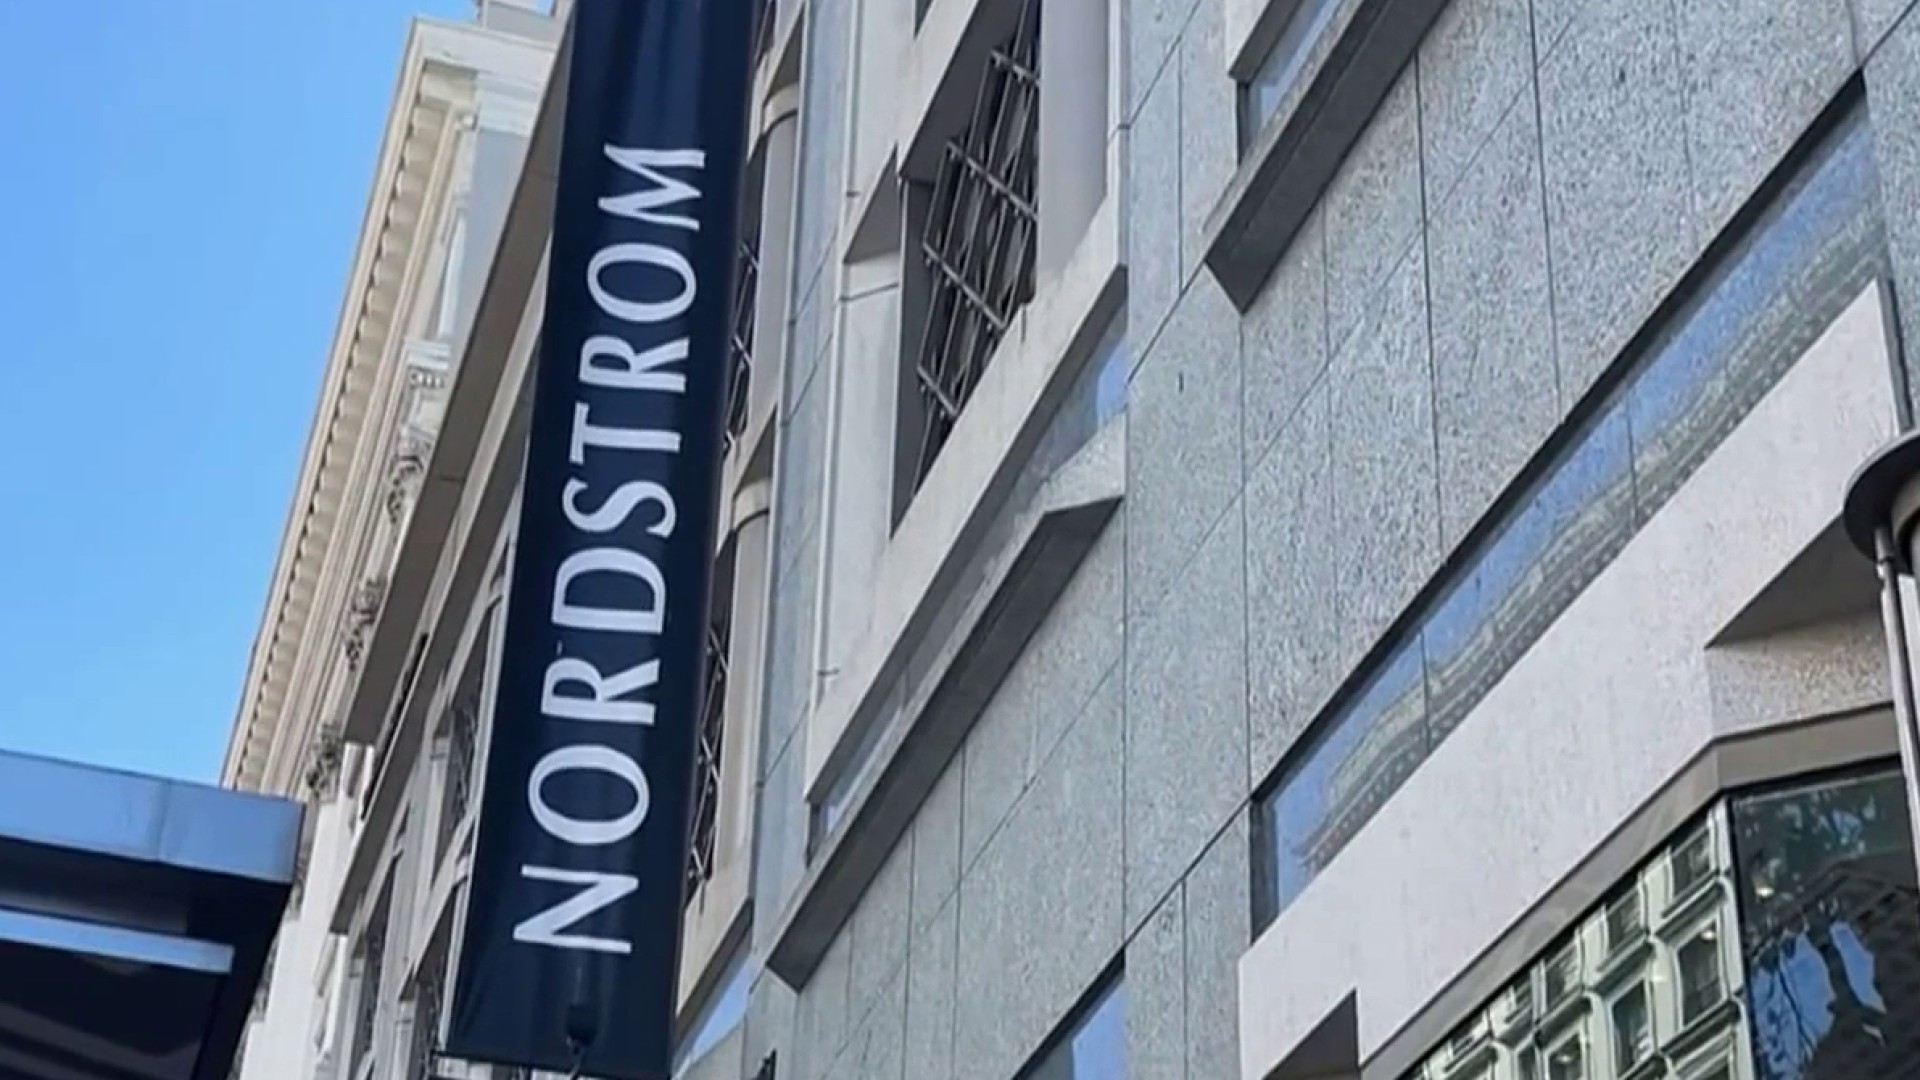 Nordstrom Leaving San Francisco, Will Open Store in City With Less